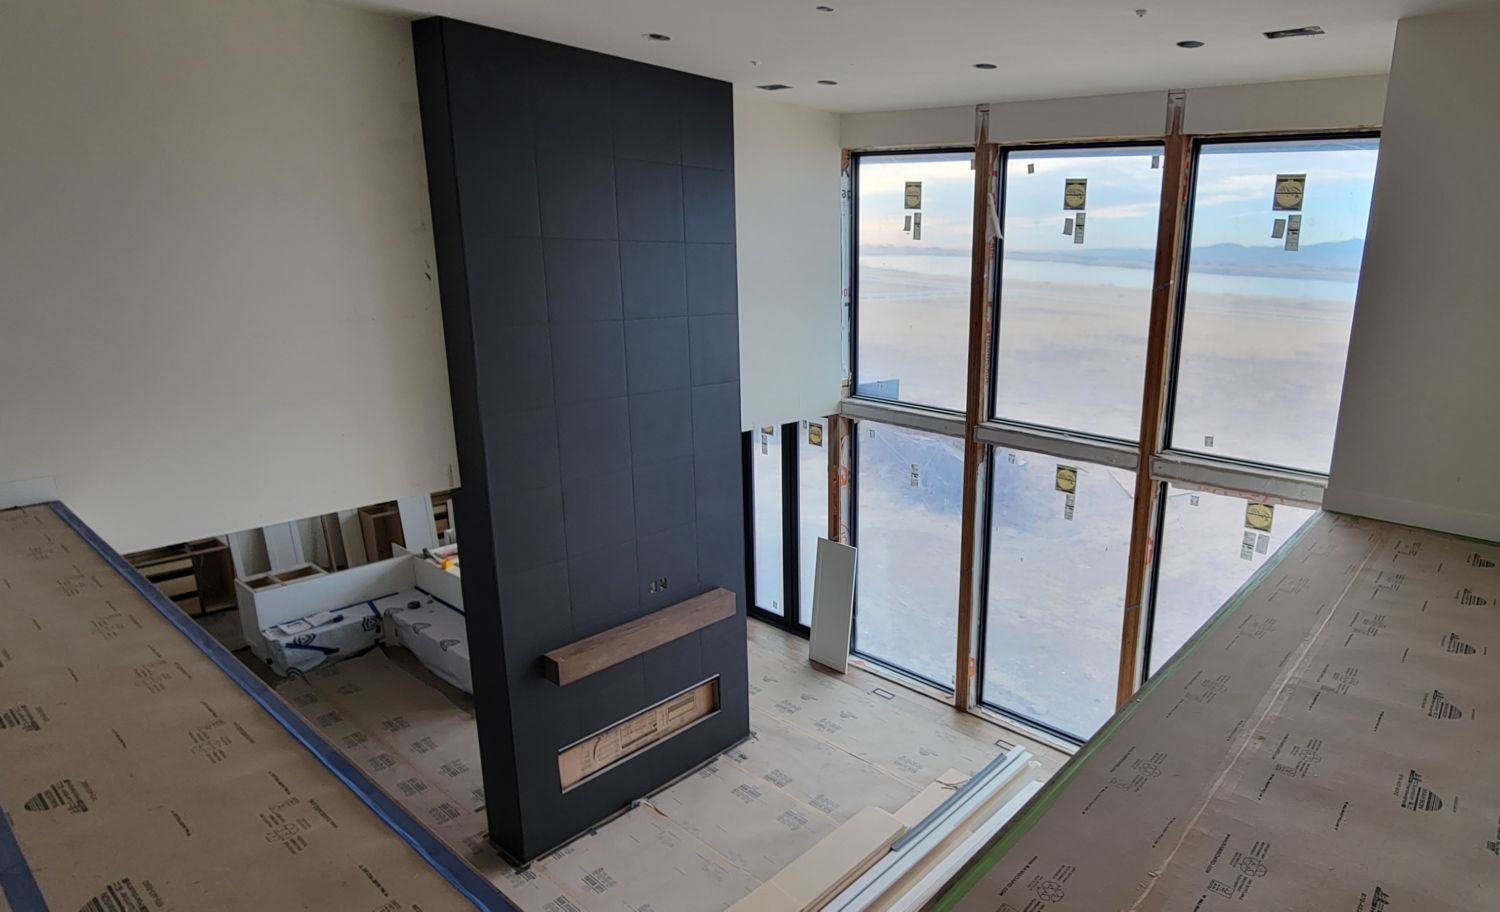 custom-home-black-tile-fireplace-surround-view-from-catwalk